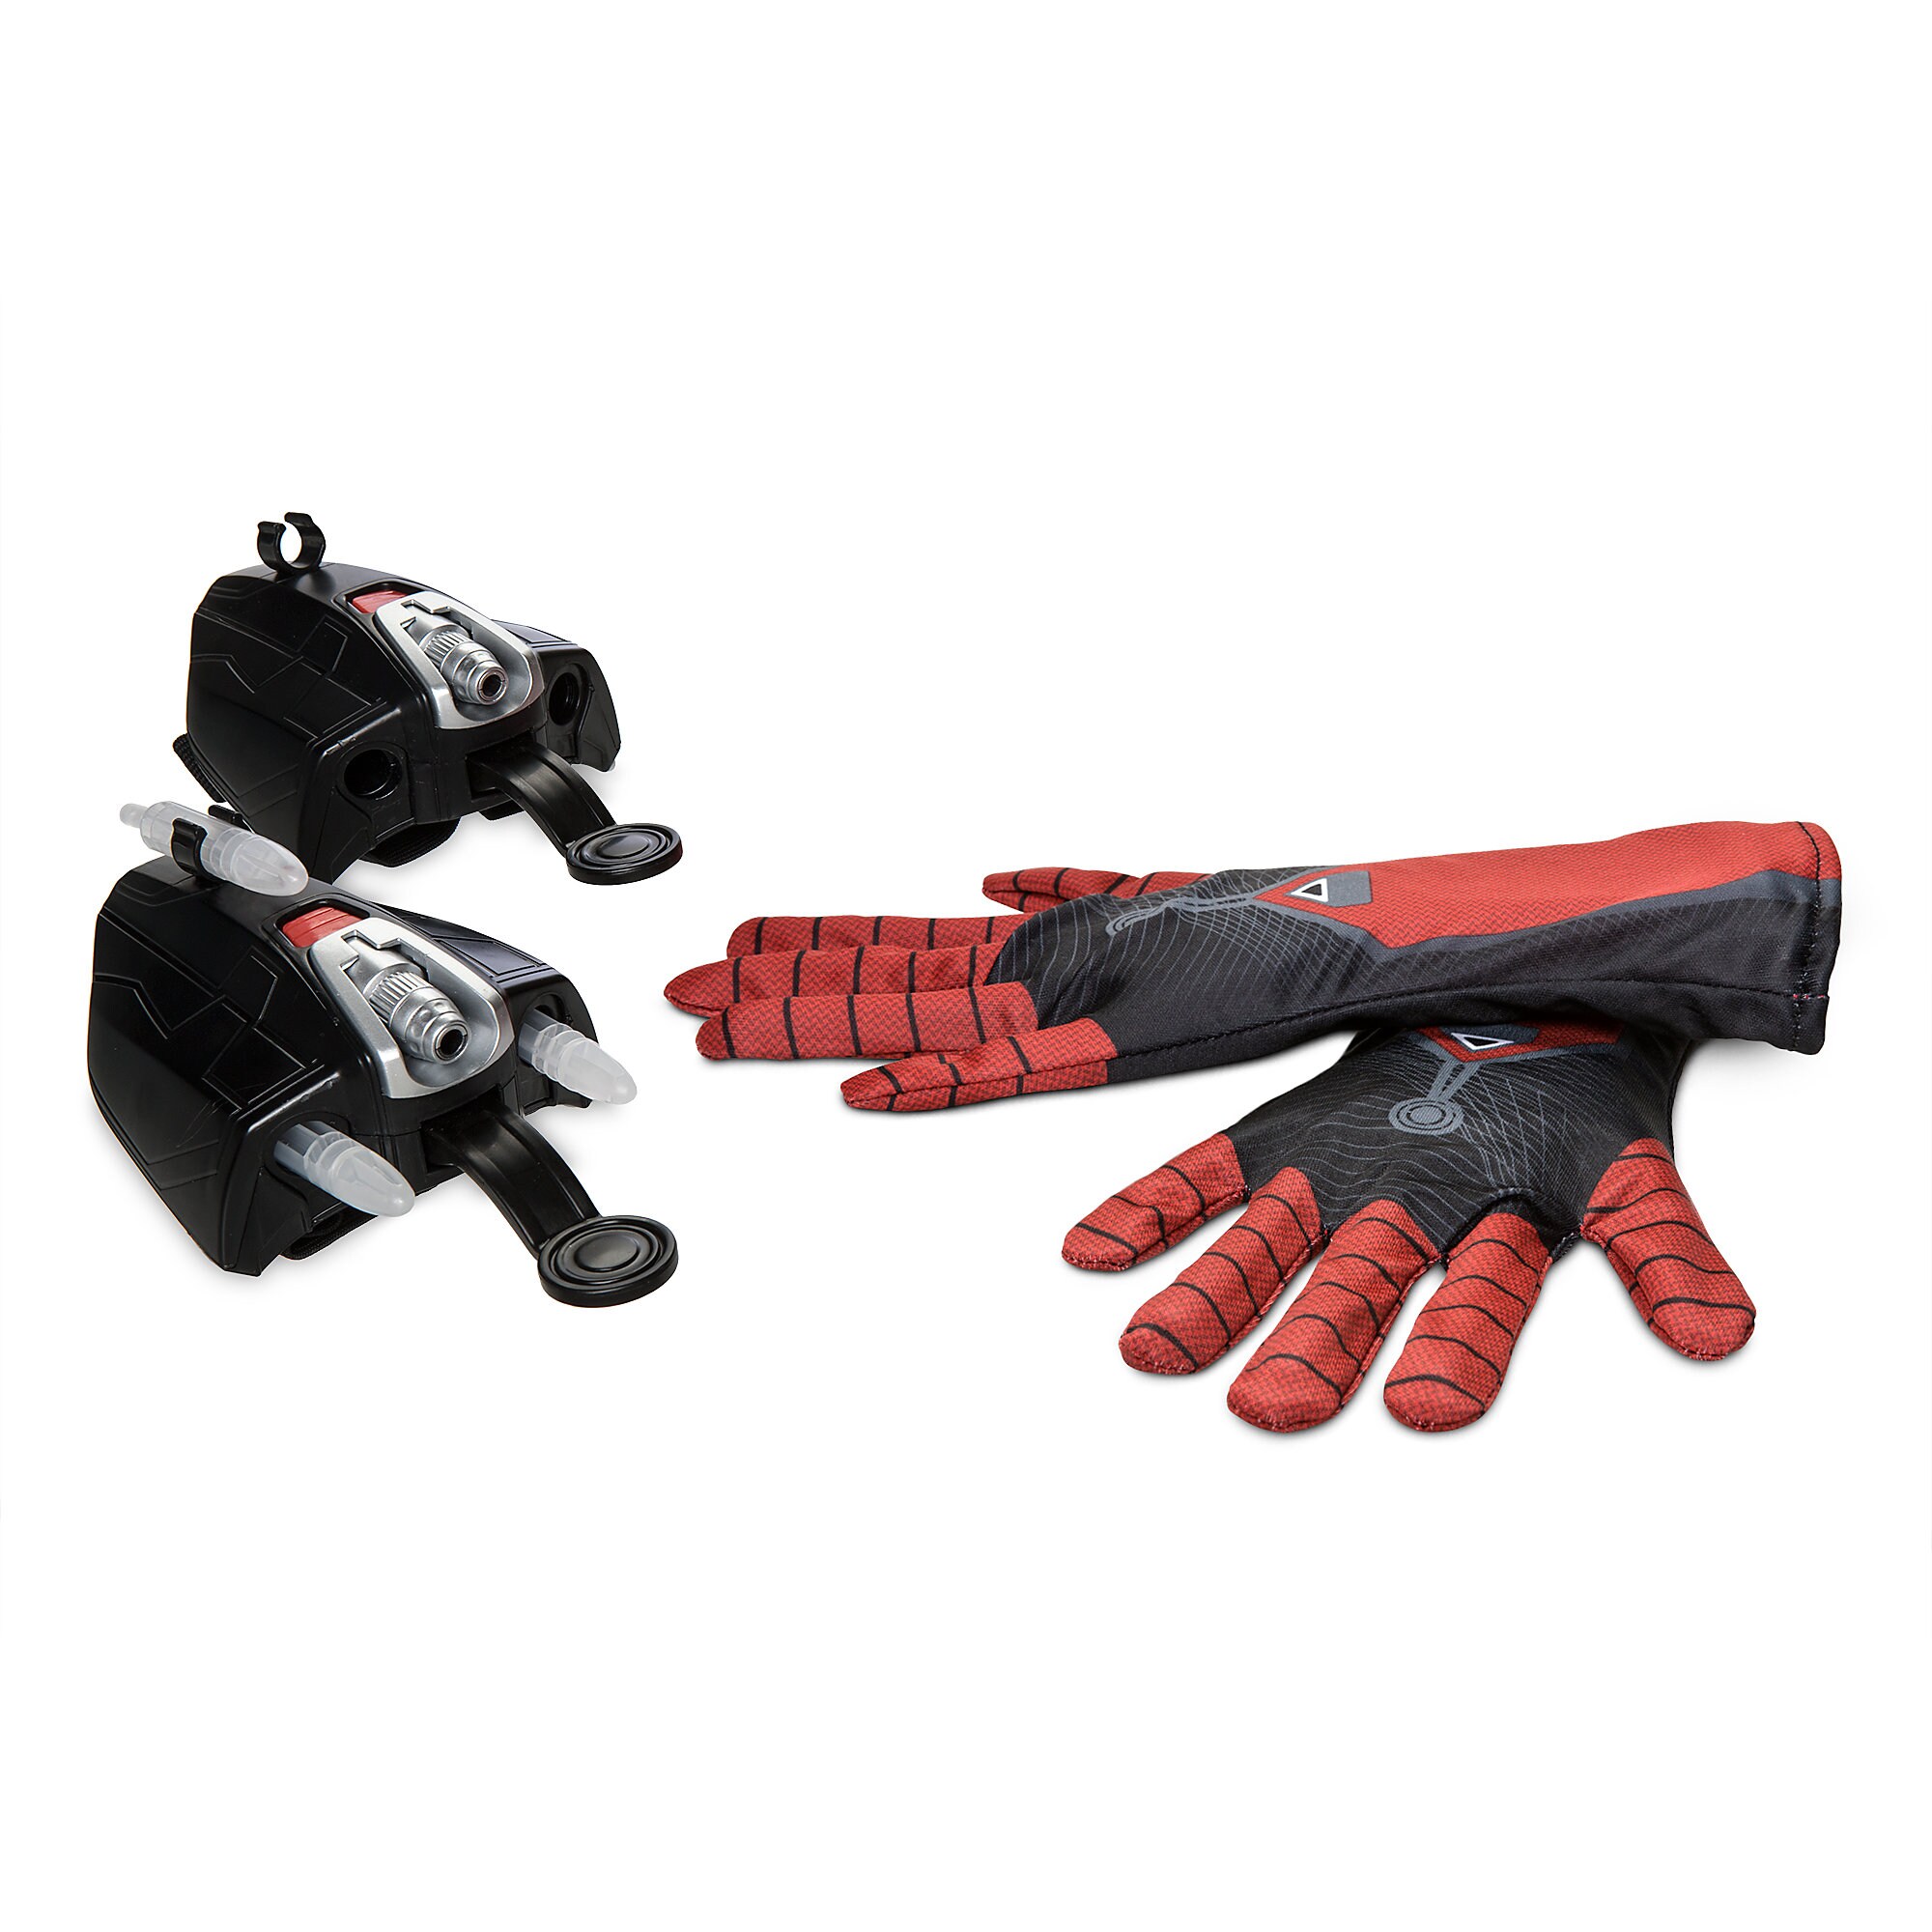 Spider-Man Webshooter Play Set - Spider-Man: Far from Home